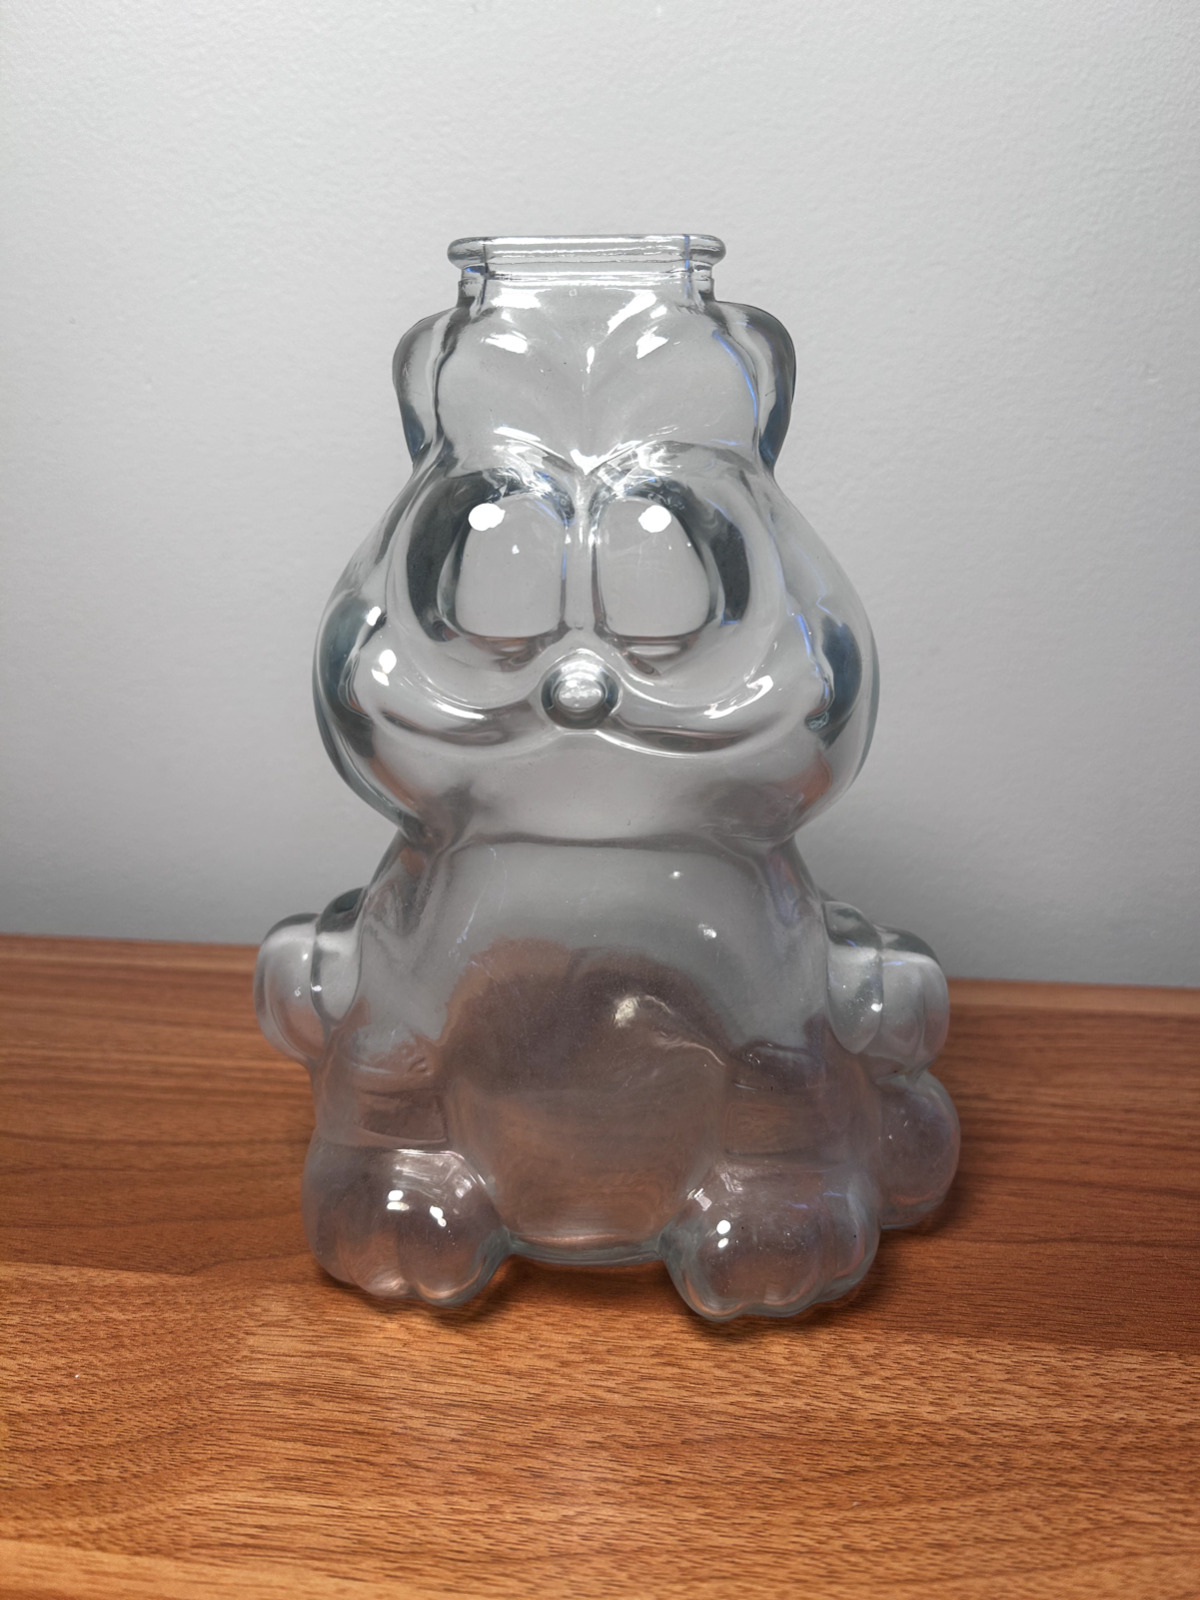 GARFIELD CAT BANK Vintage Anchor Hocking Clear Glass Penny Coin Piggy Bank 1970s